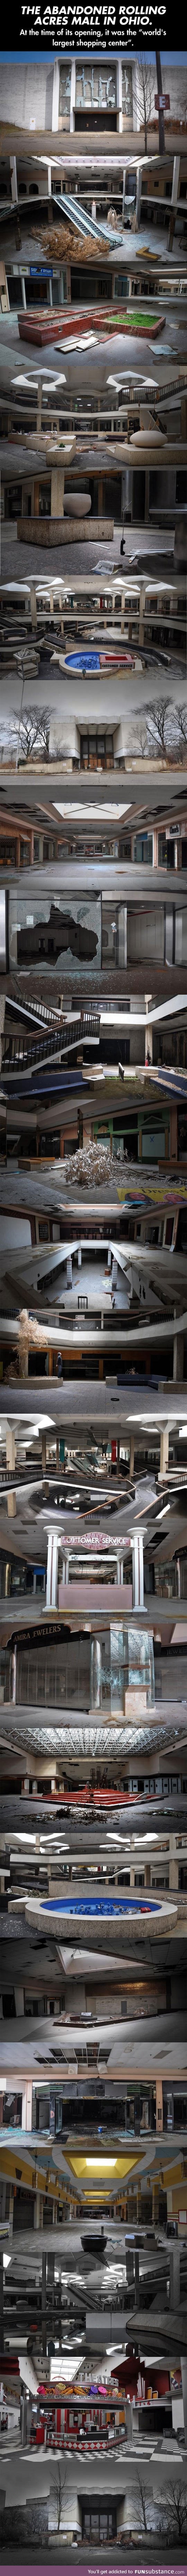 Abandoned mall in ohio